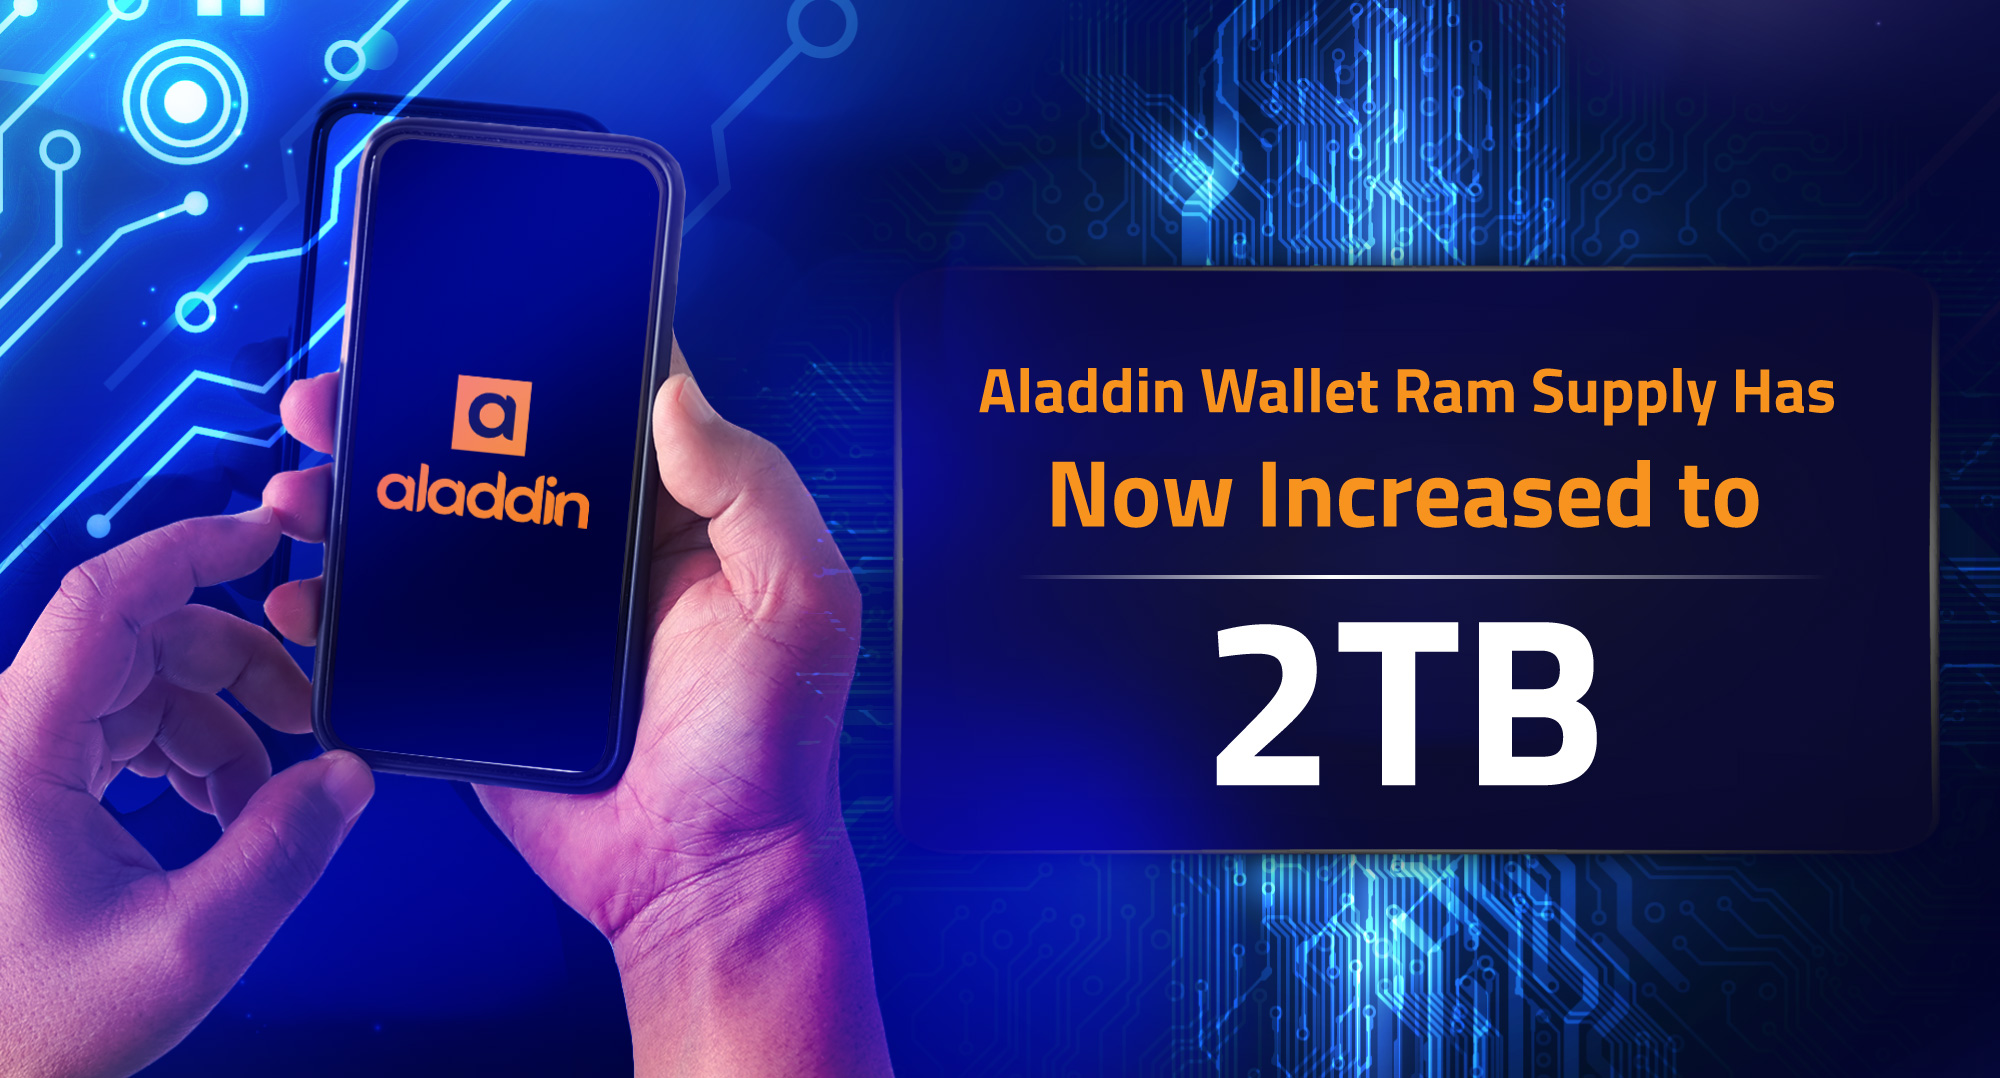 Aladdin-Wallet-Ram-Supply-Has-Now-Increased-to-2TB